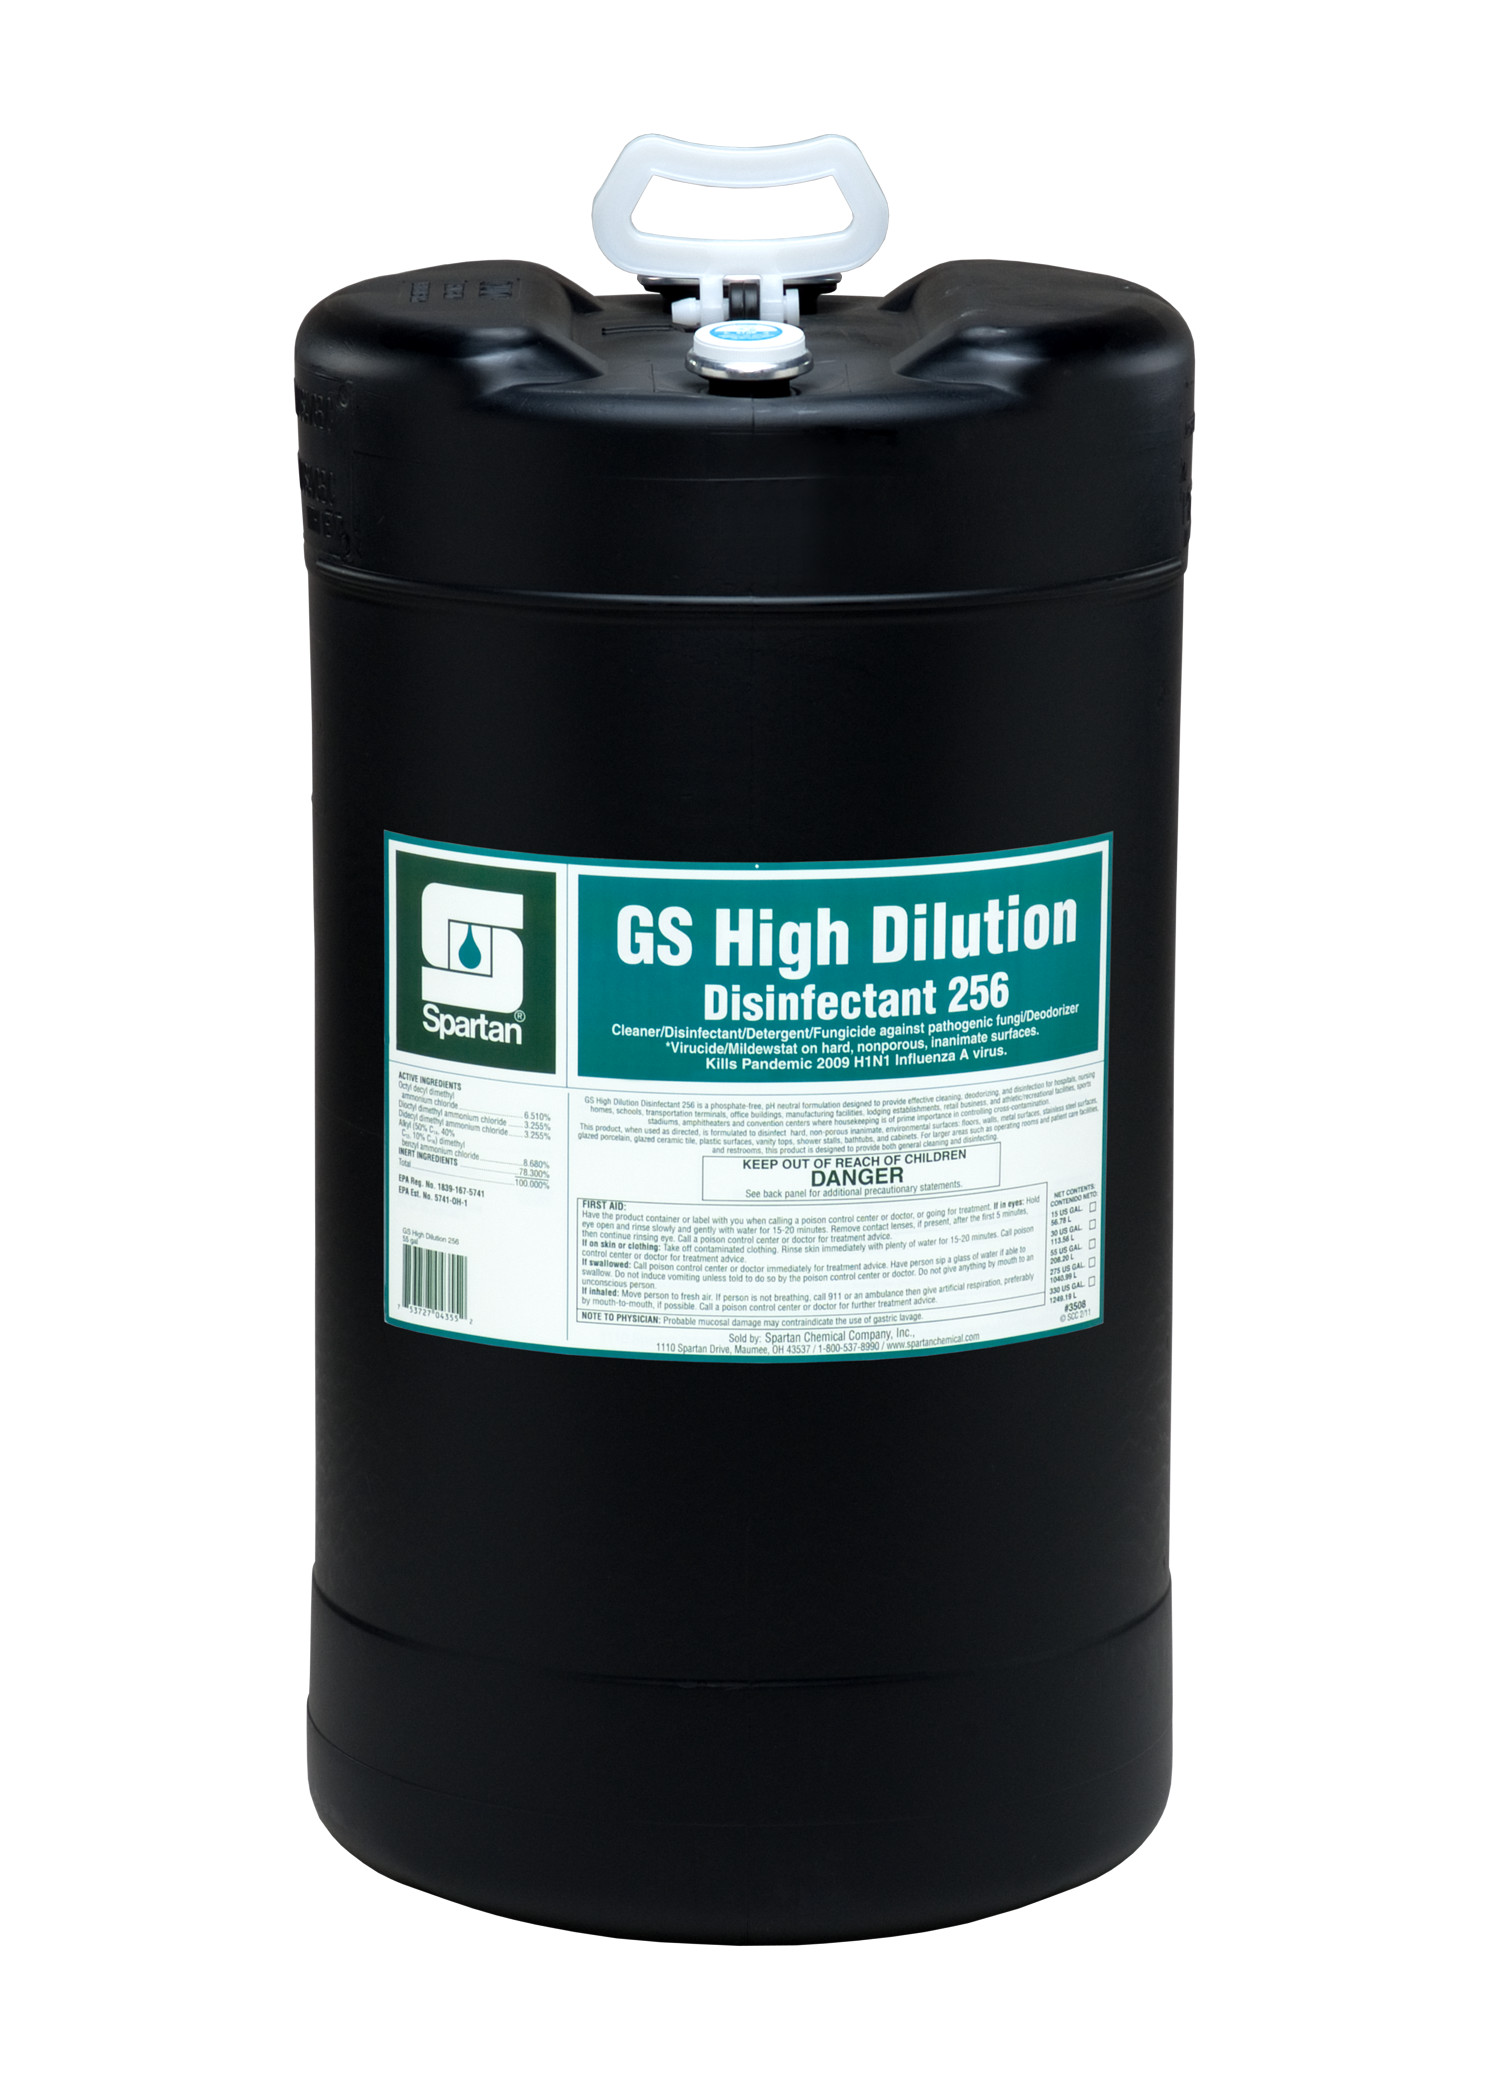 Spartan Chemical Company GS High Dilution Disinfectant 256, 15 GAL DRUM